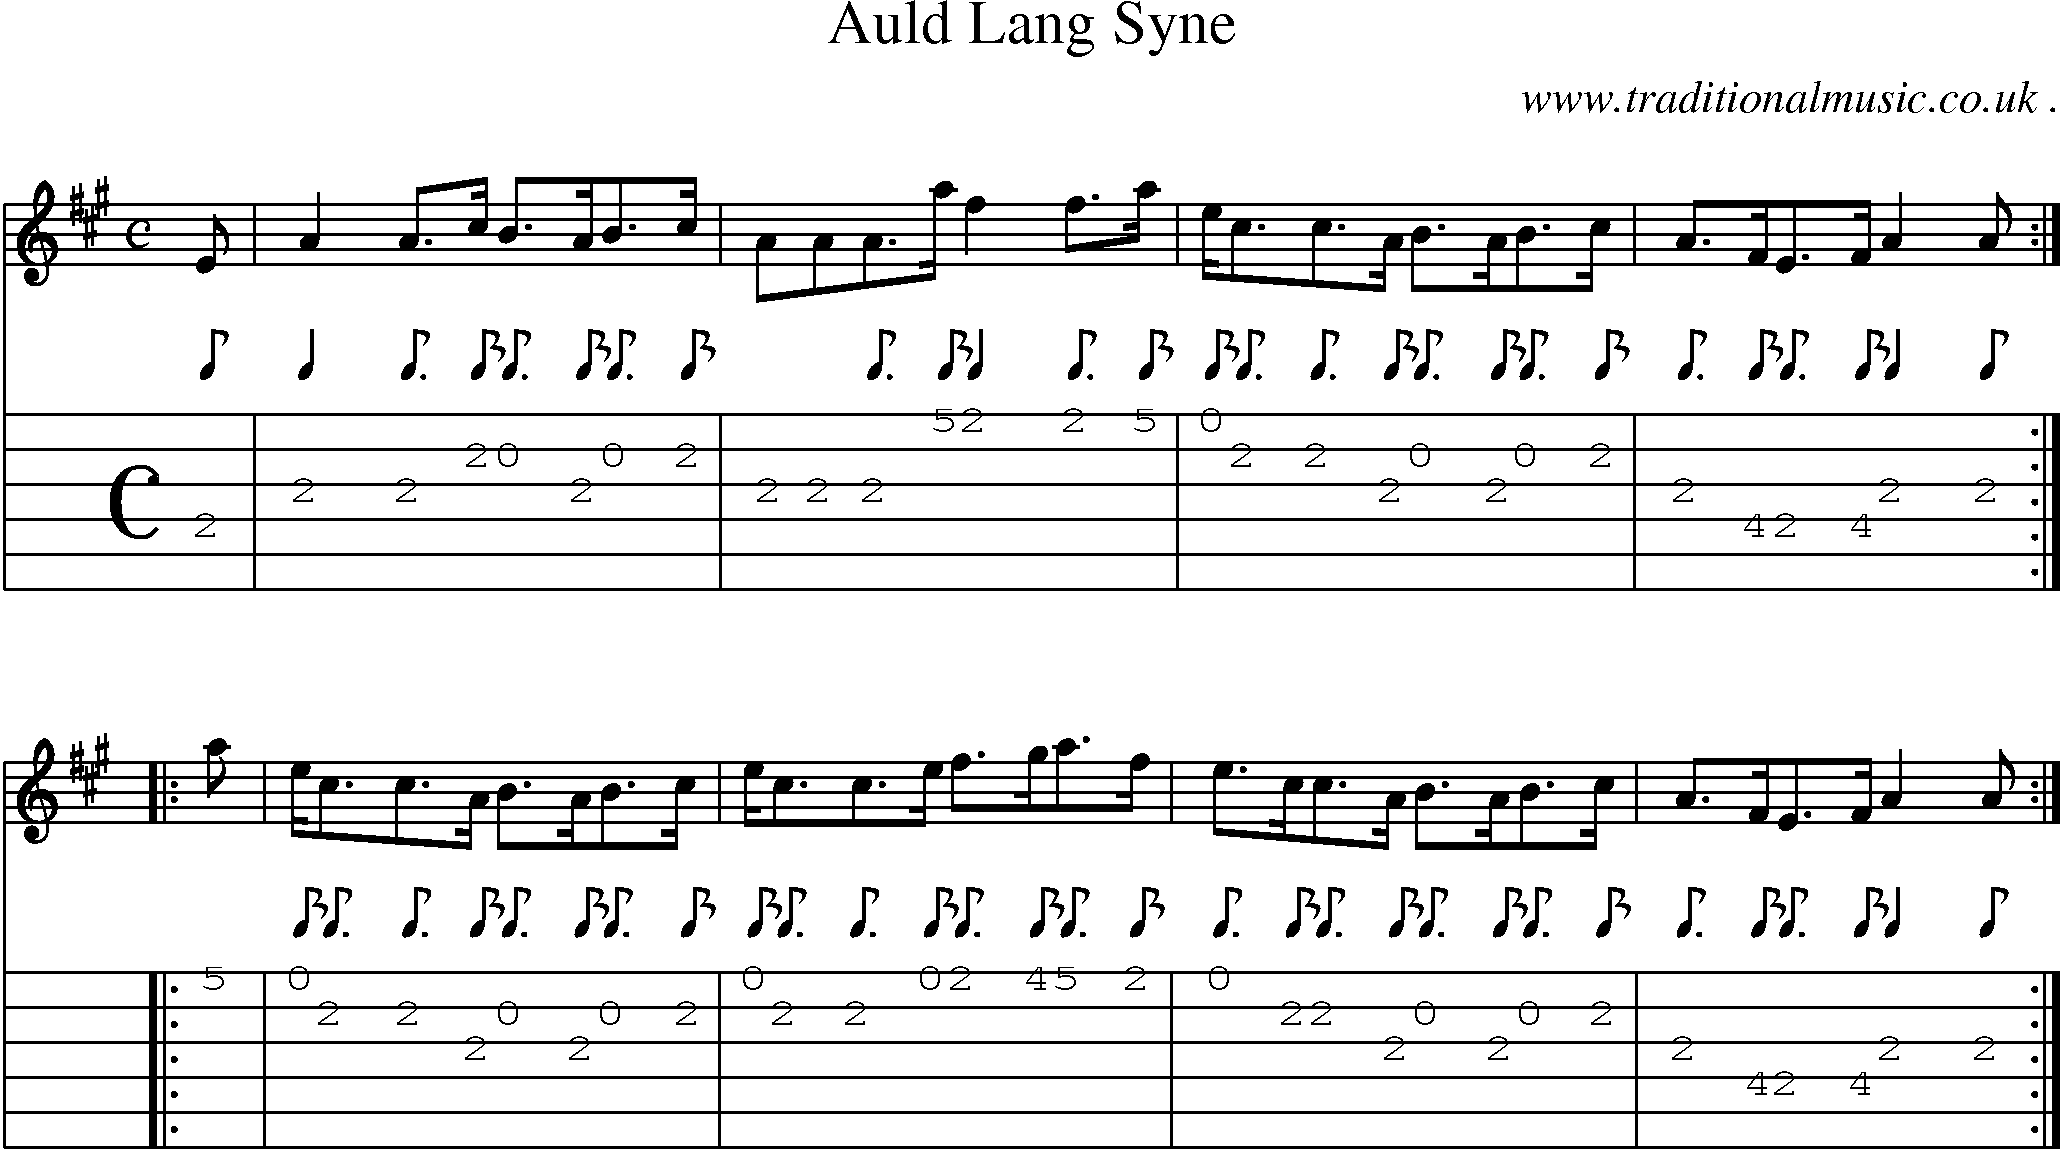 Sheet-music  score, Chords and Guitar Tabs for Auld Lang Syne